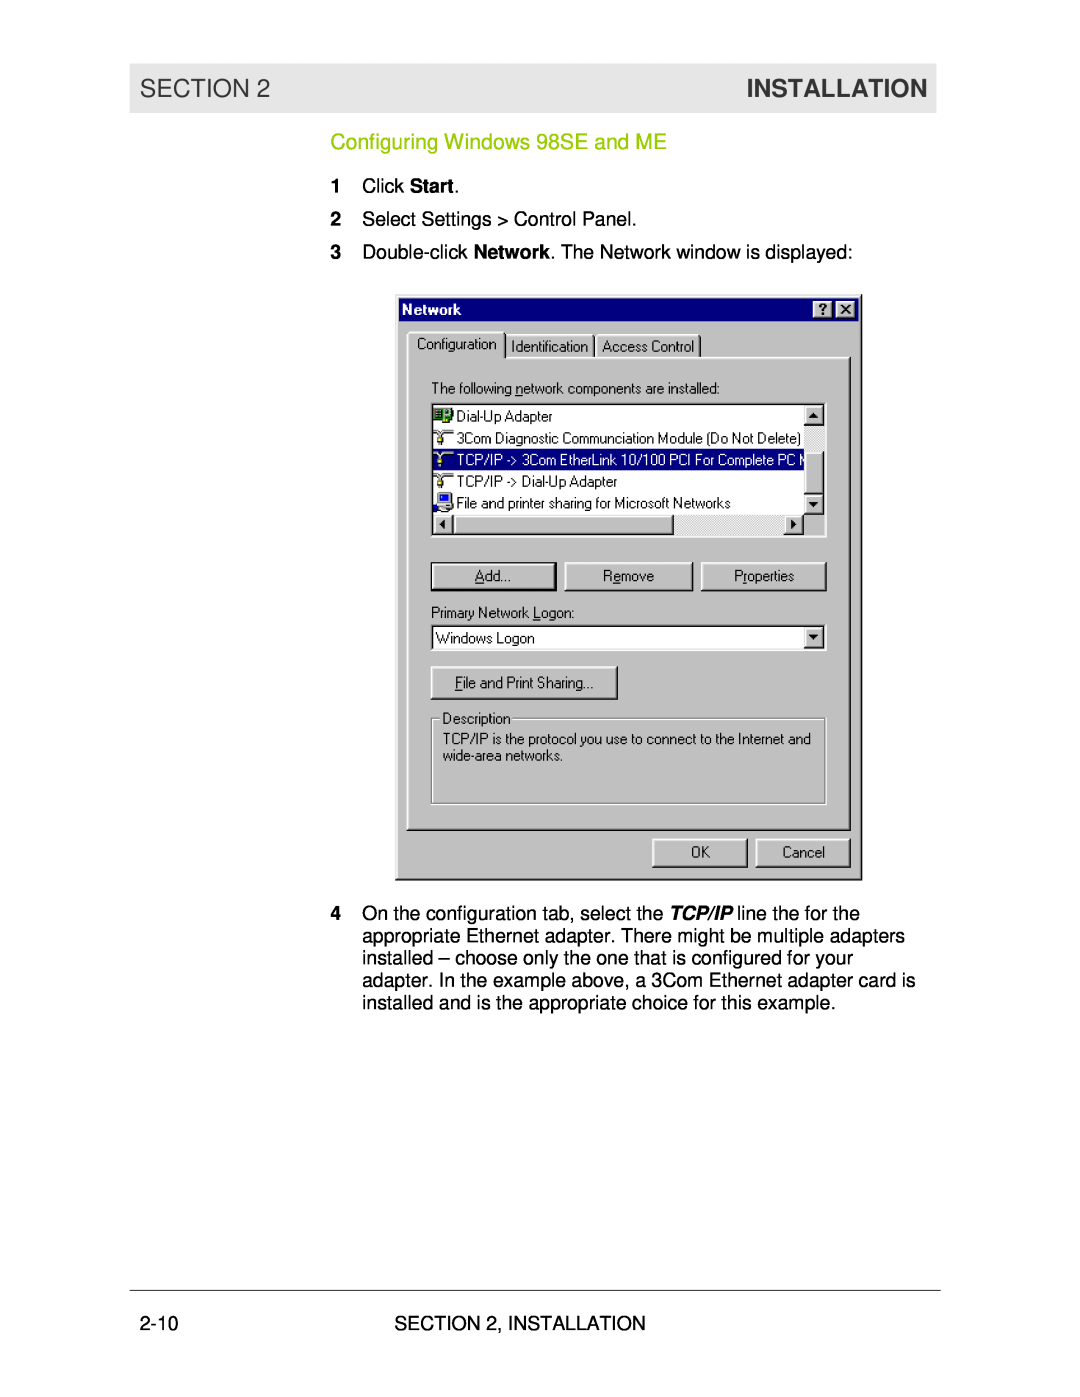 Motorola WR850G manual Configuring Windows 98SE and ME, Section, Installation 